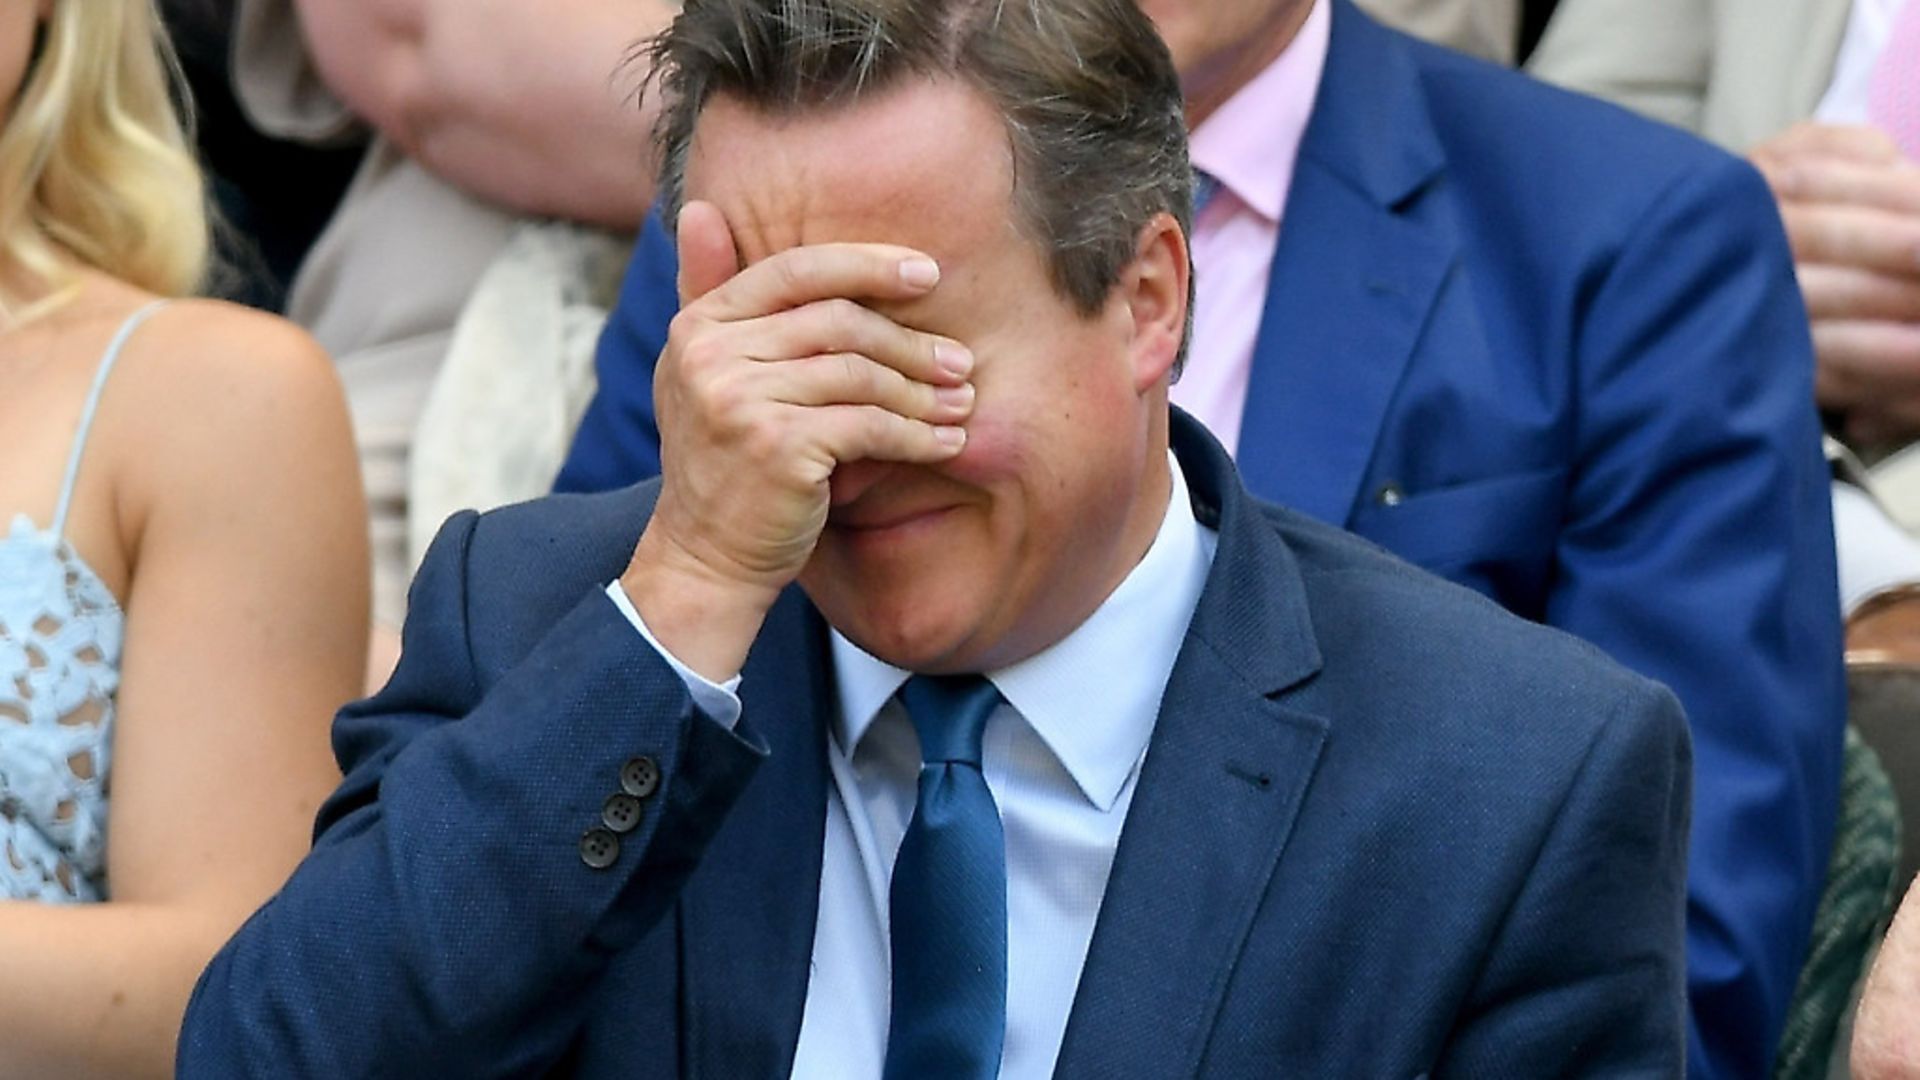 David Cameron with his head in his hands.  Photo: Karwai Tang/Getty Images - Credit: WireImage